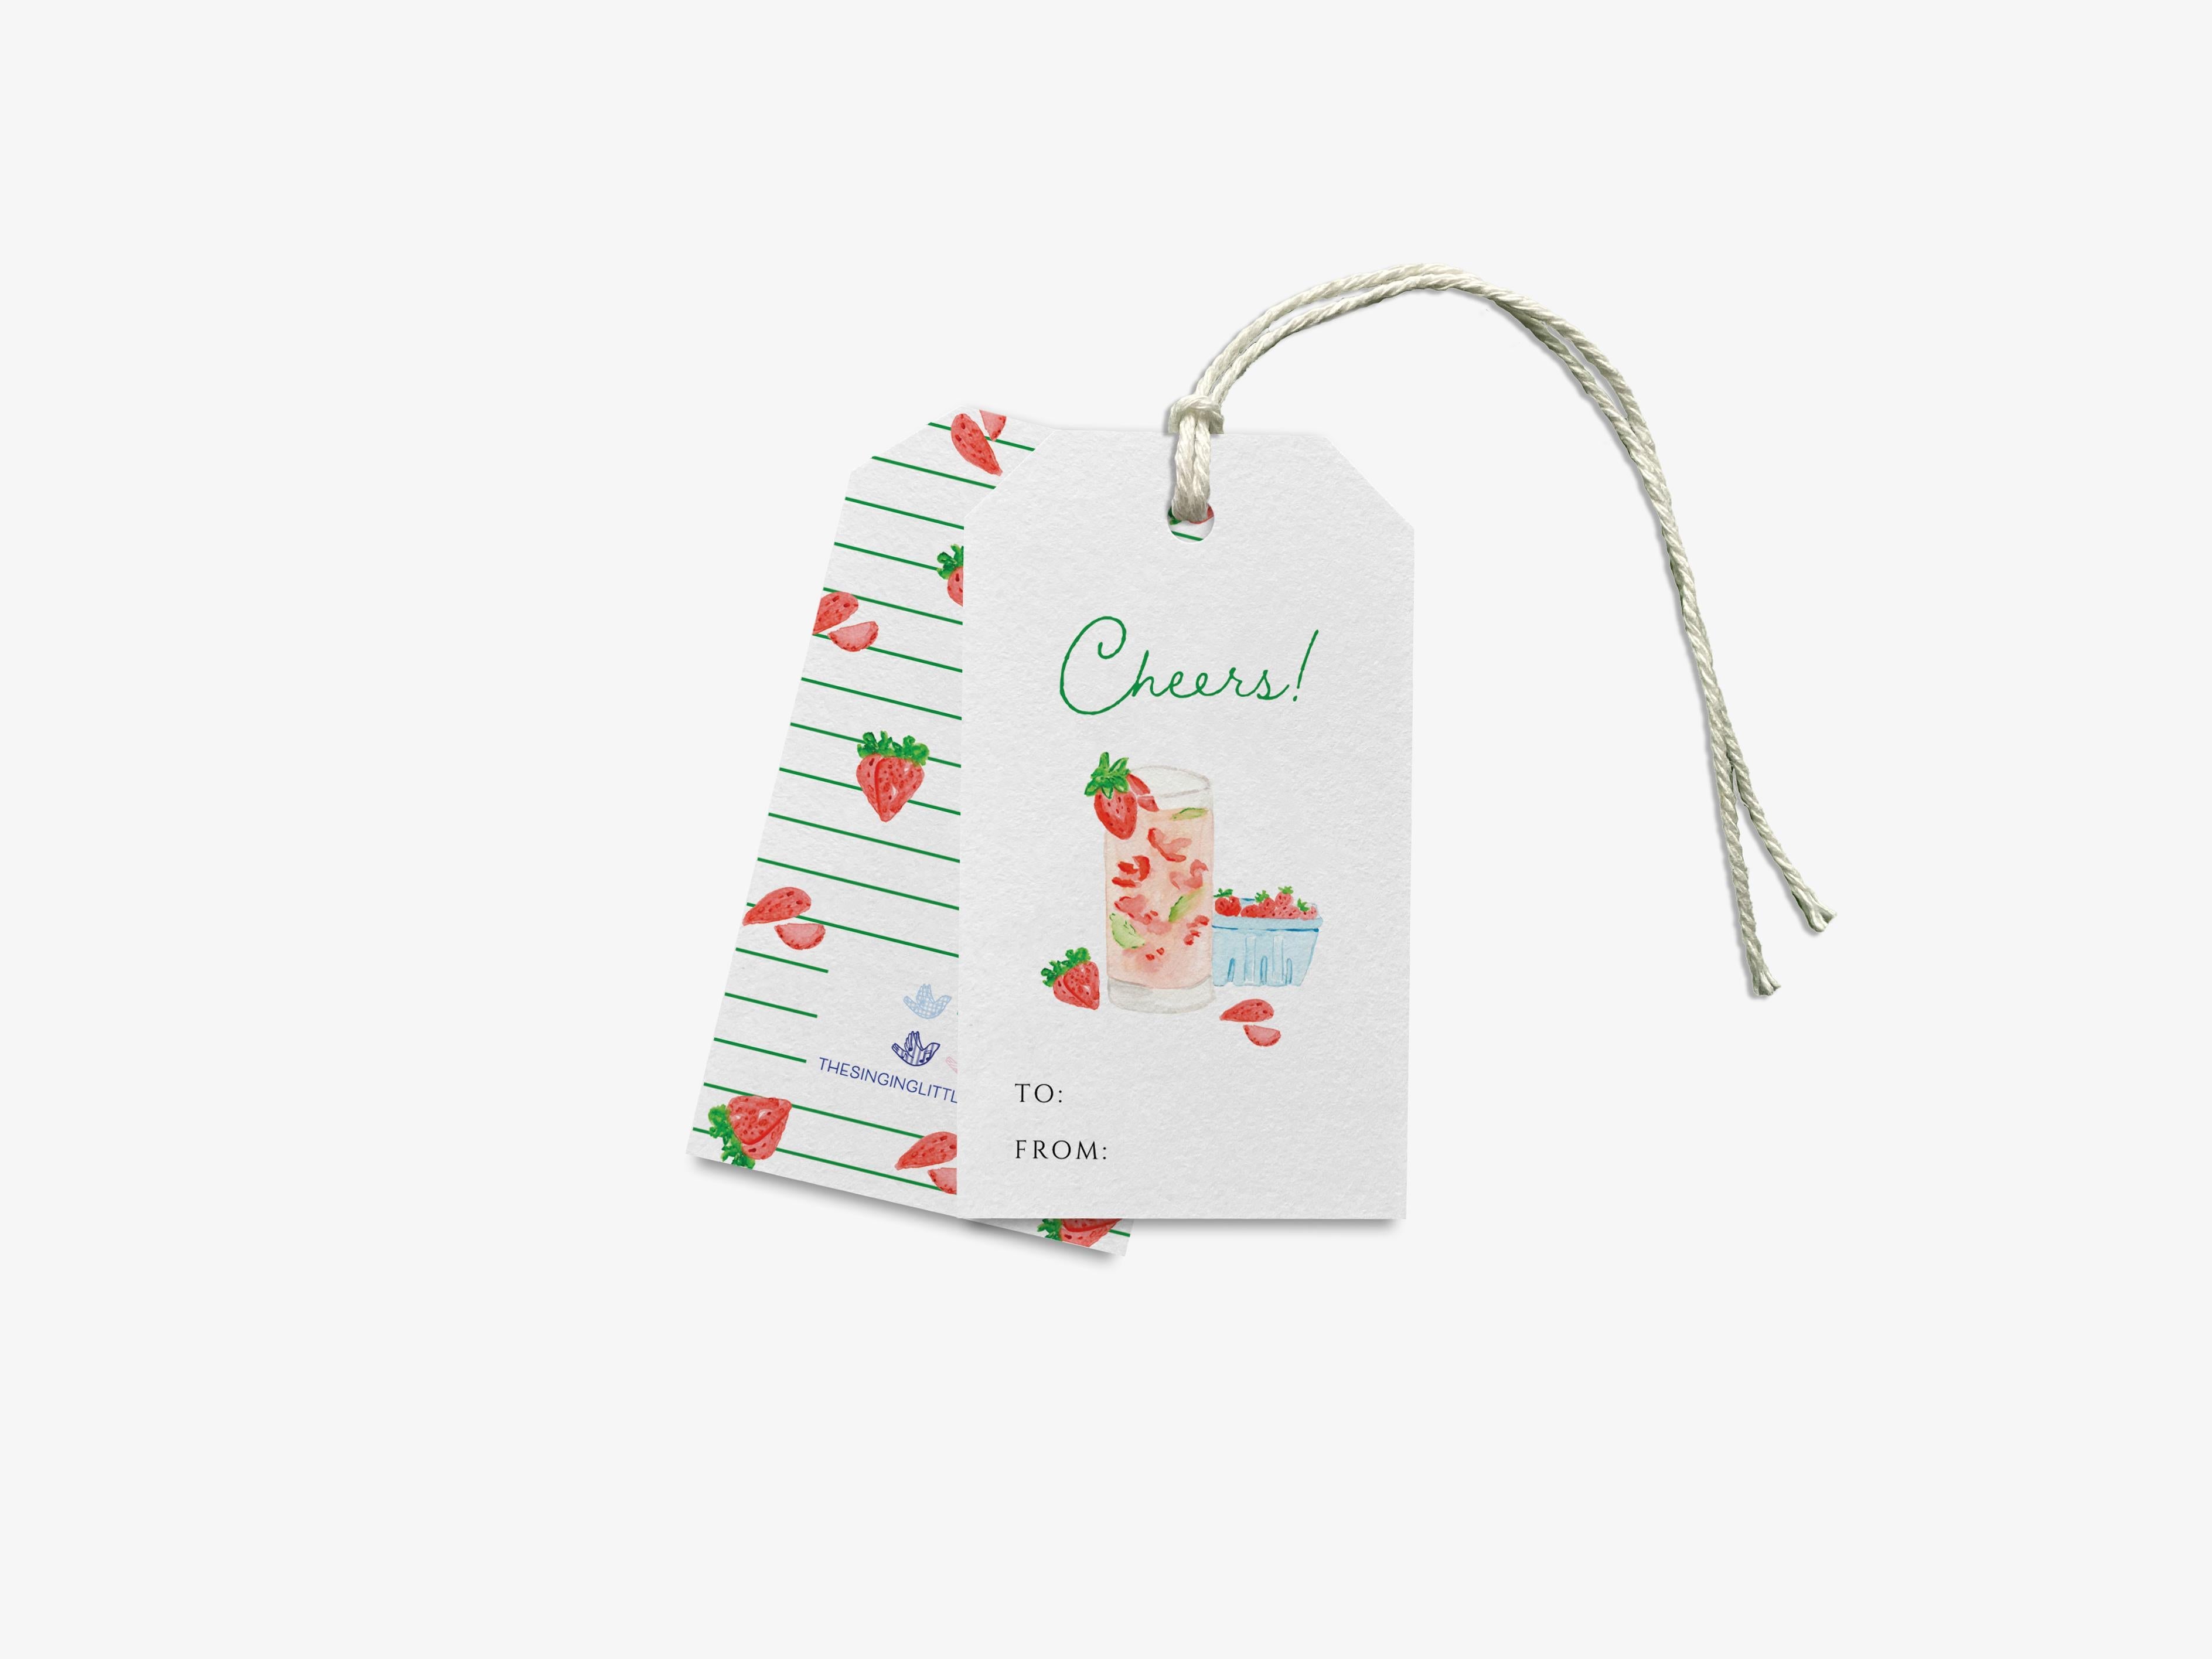 Strawberry Basil Cheers Gift Tags [Set of 8]-These gift tags come in sets, hole-punched with white twine and feature our hand-painted watercolor strawberries and cocktail glass, printed in the USA on 120lb textured stock. They make great tags for gifting or gifts for the cocktail lover in your life.-The Singing Little Bird